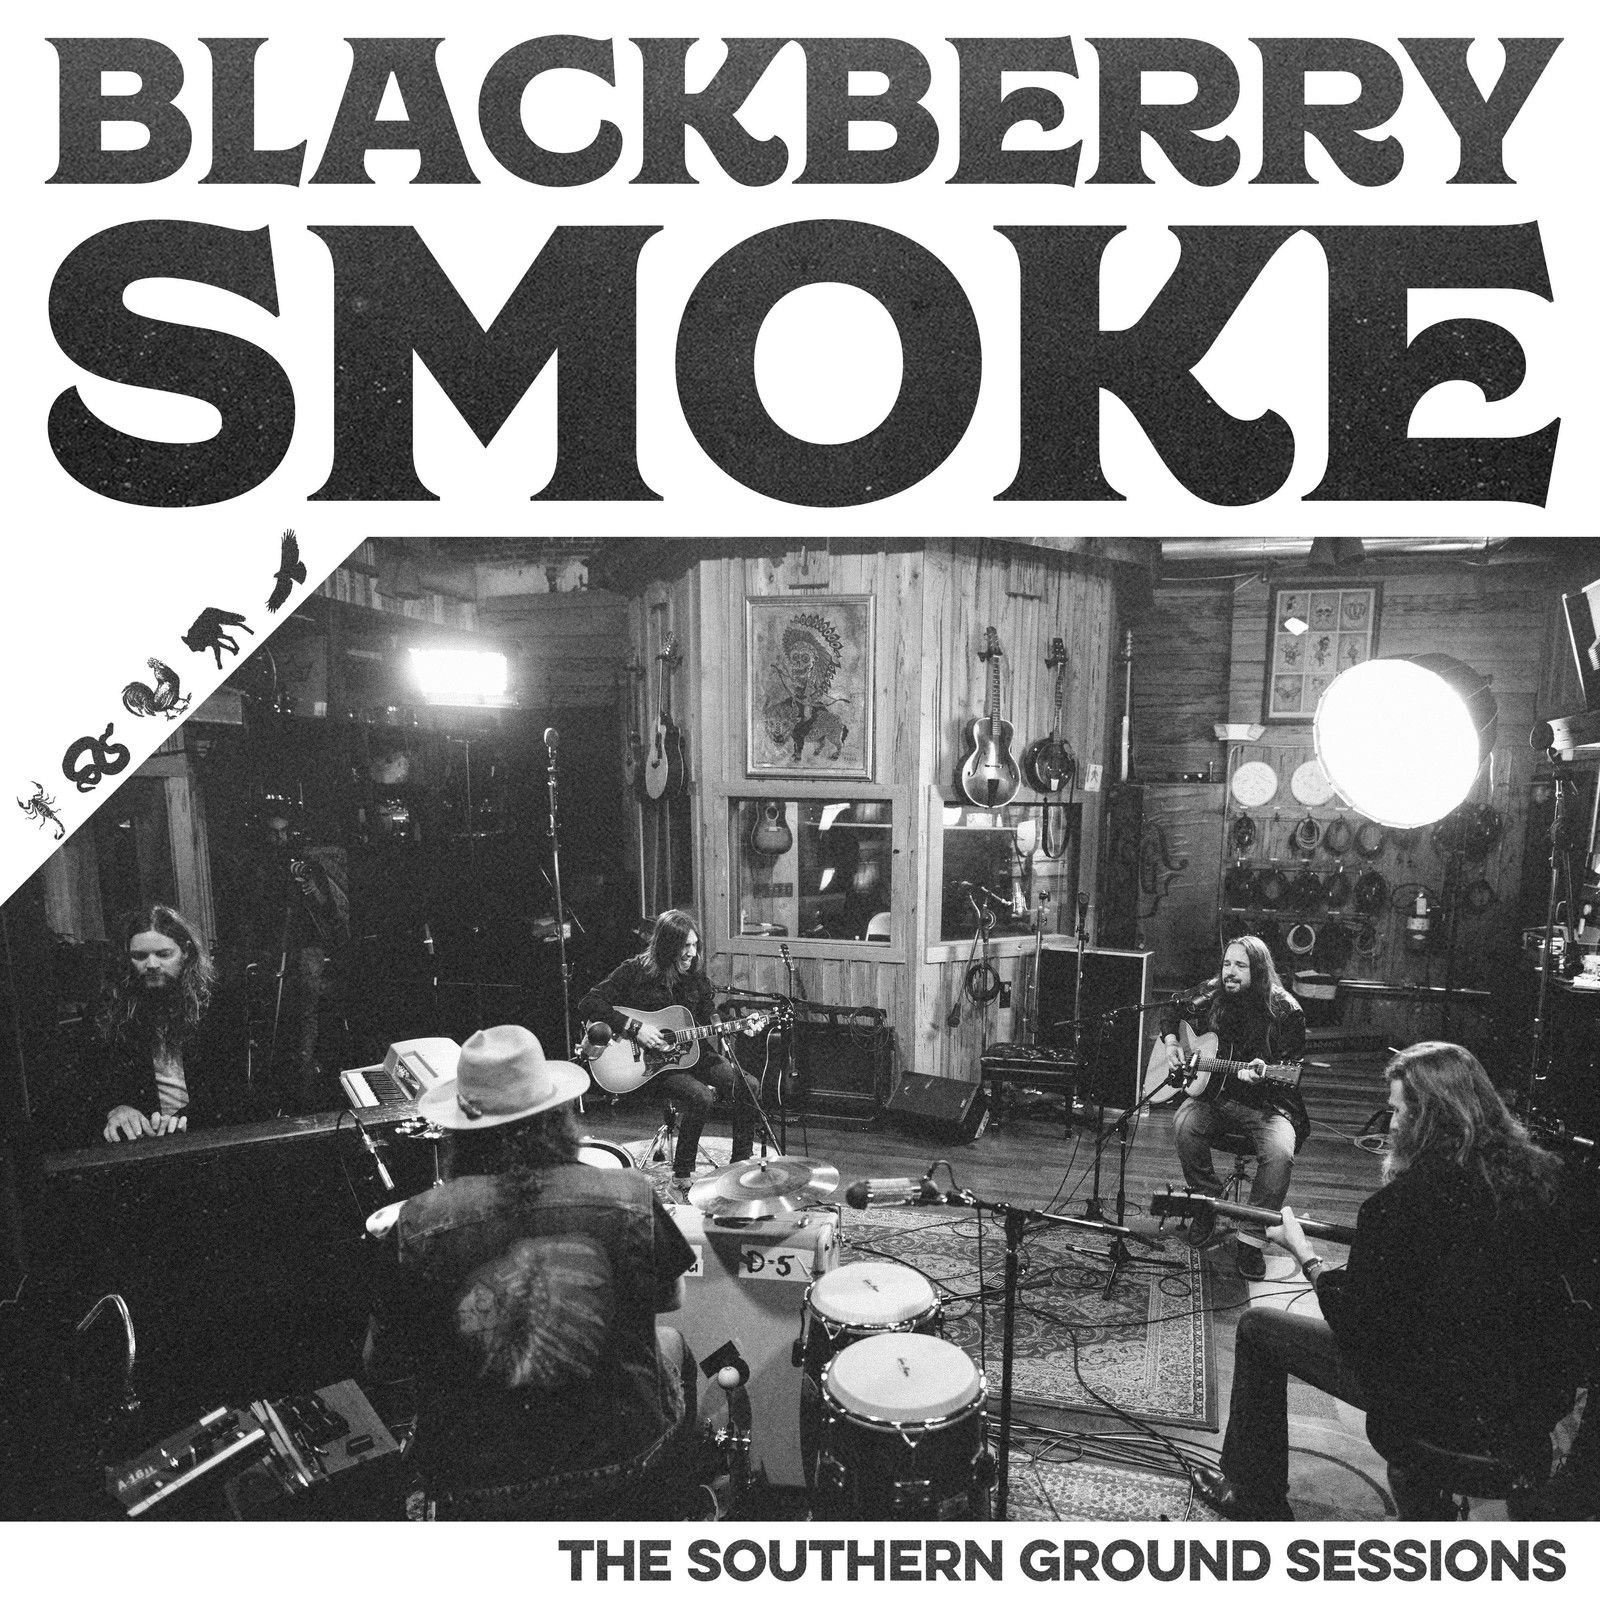 Blackberry Smoke - The Southern Ground Sessions (2018) 24bit FLAC Download